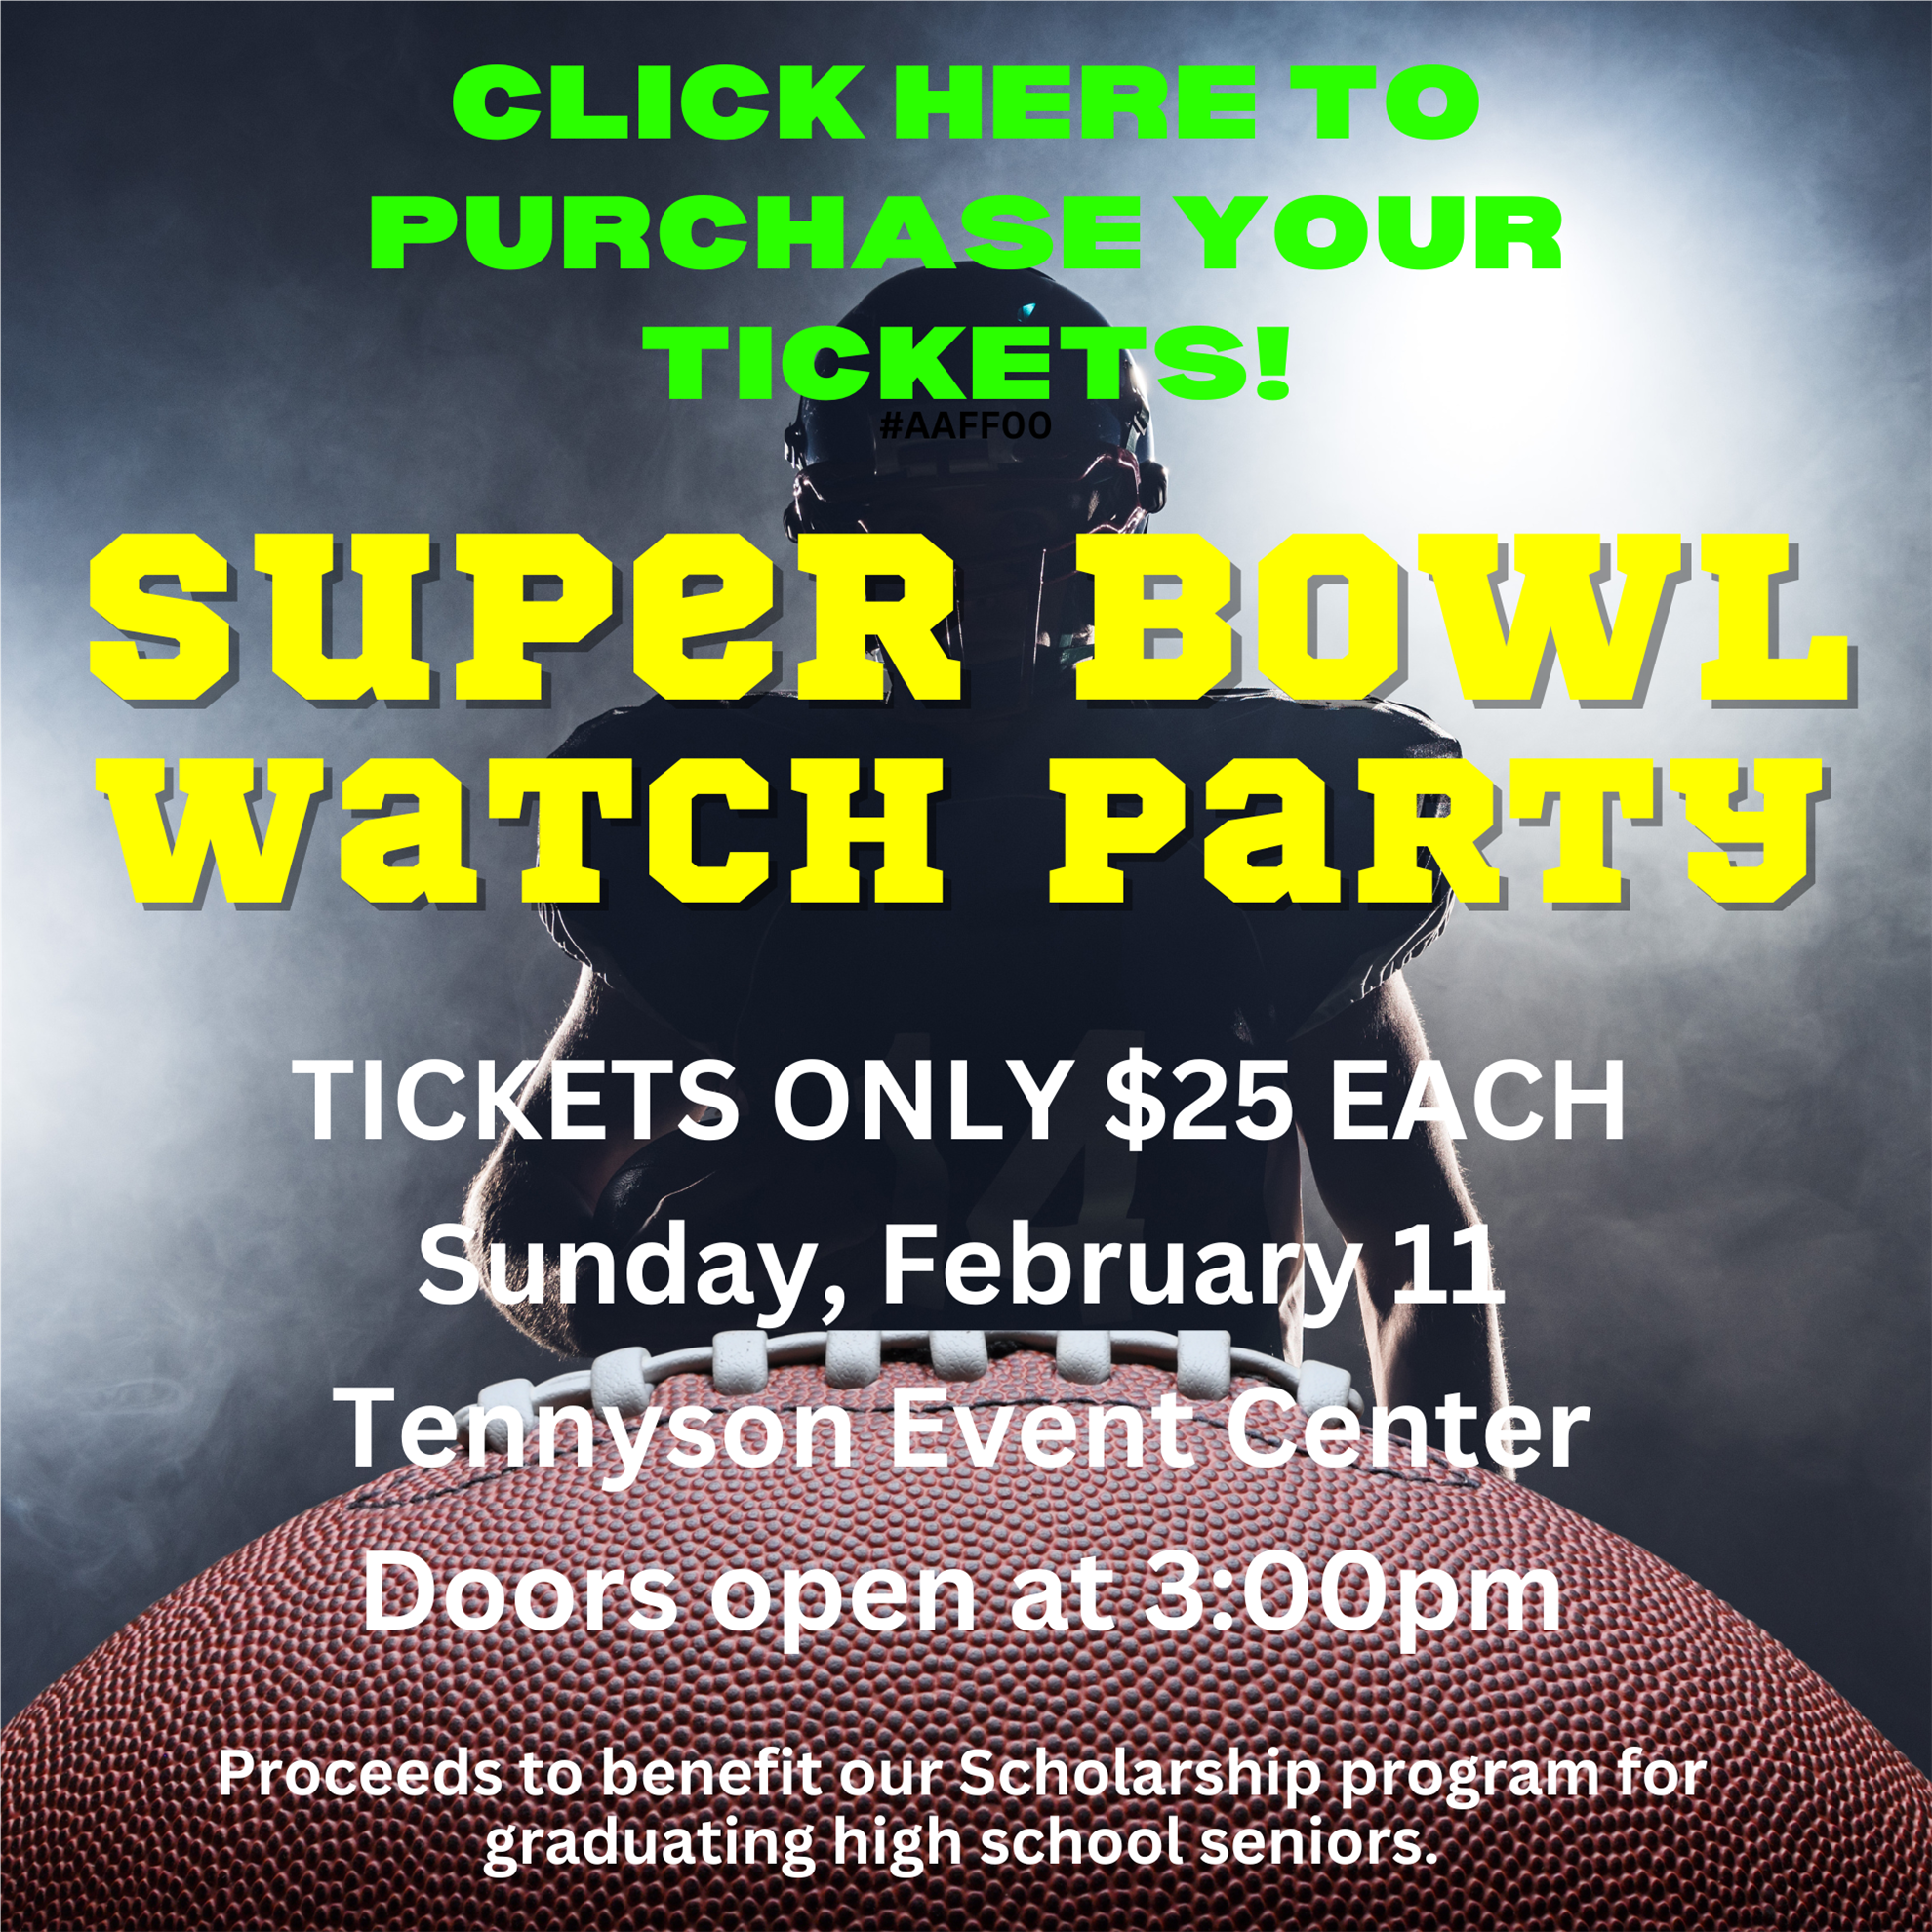 Purchase tickets to the Rotary Super Bowl Watch Party today!